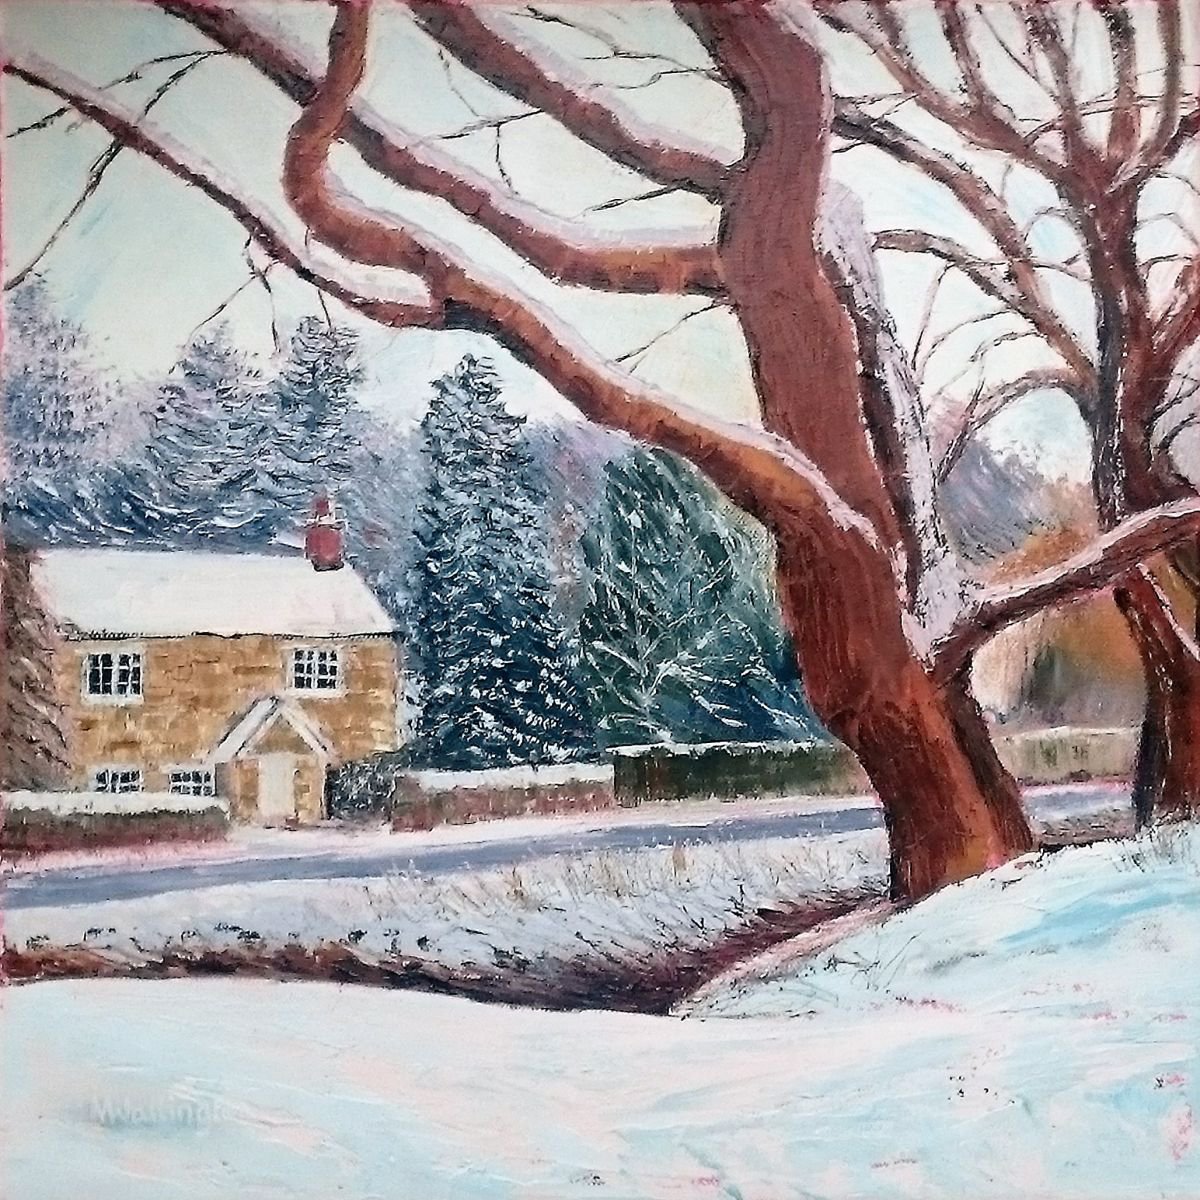 Cottage in the Snow by Michele Wallington